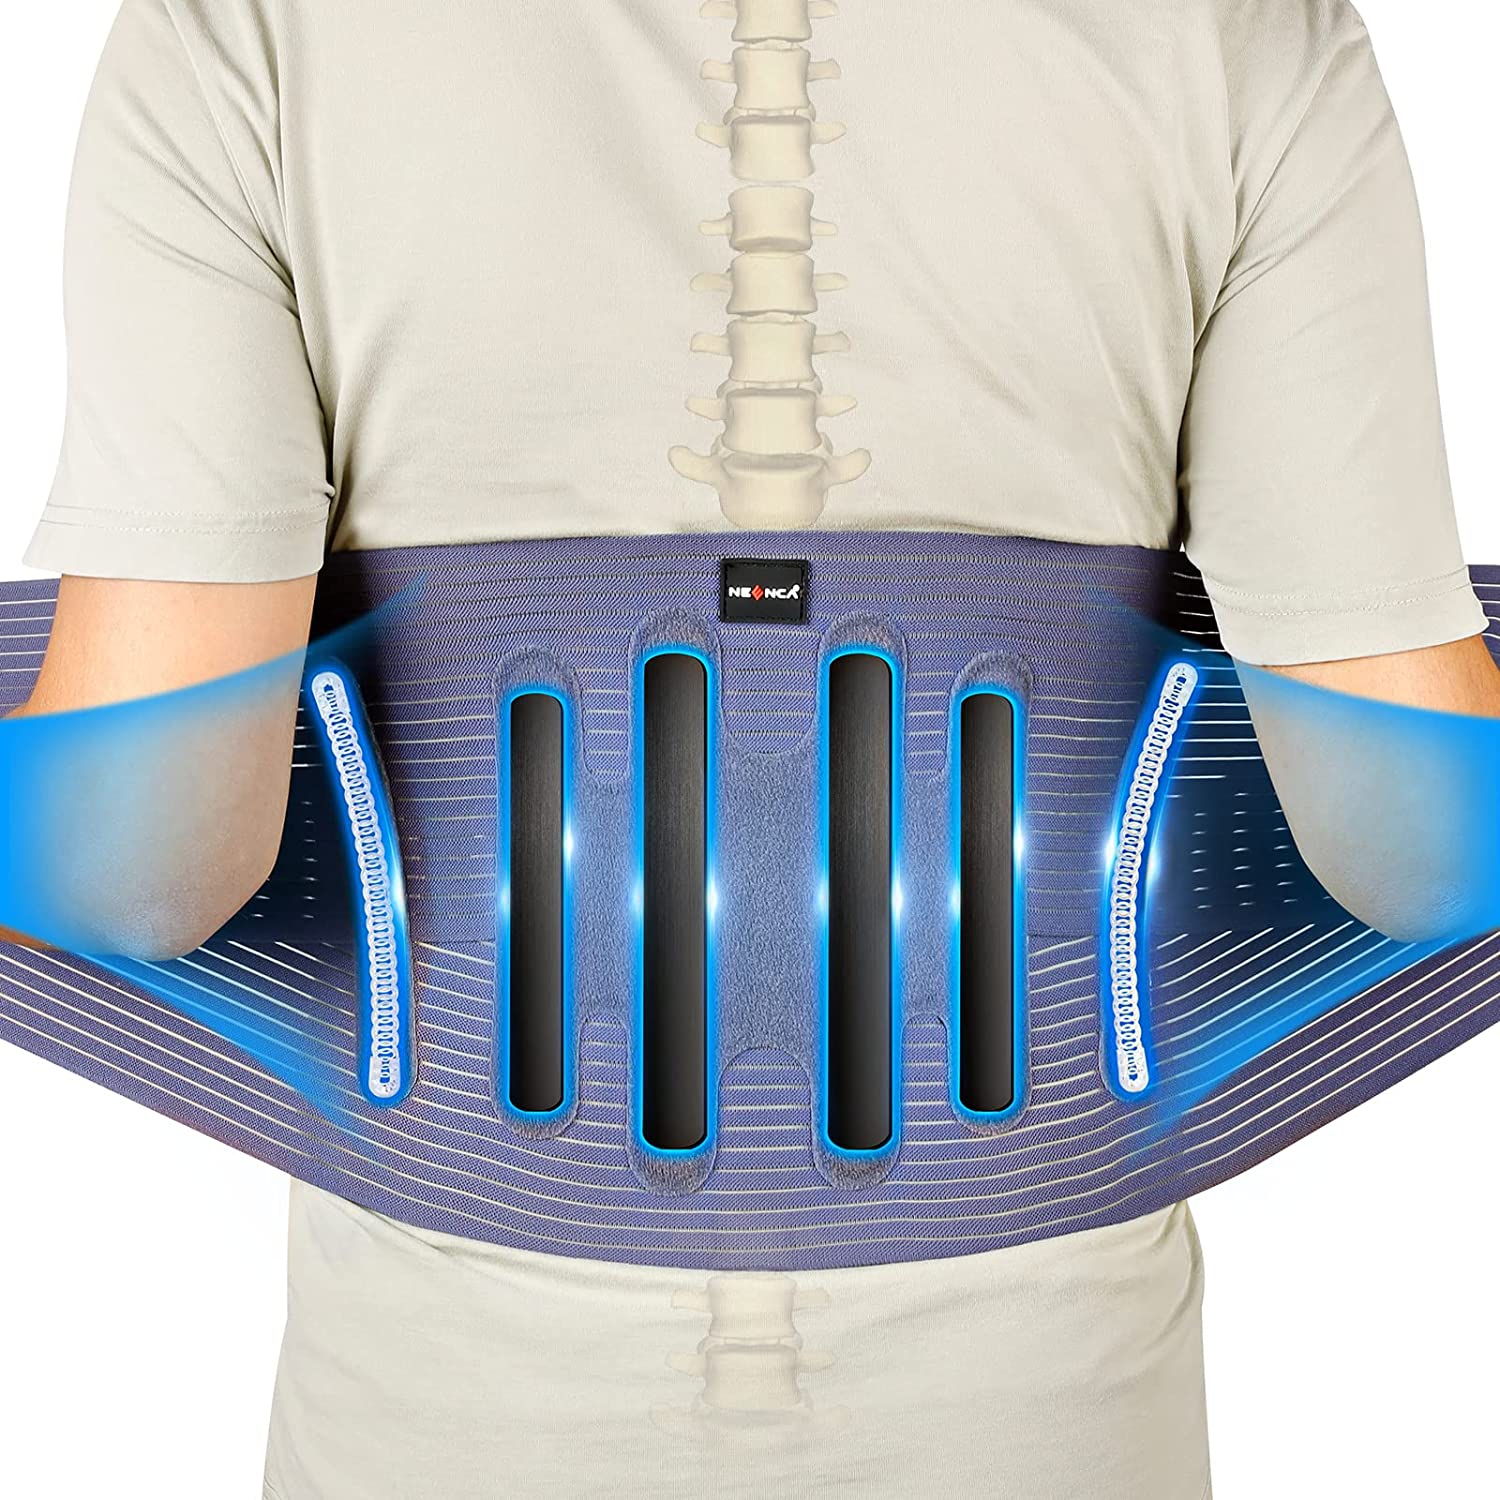 Review of NEENCA Back Support Brace for Pain Relief of Back